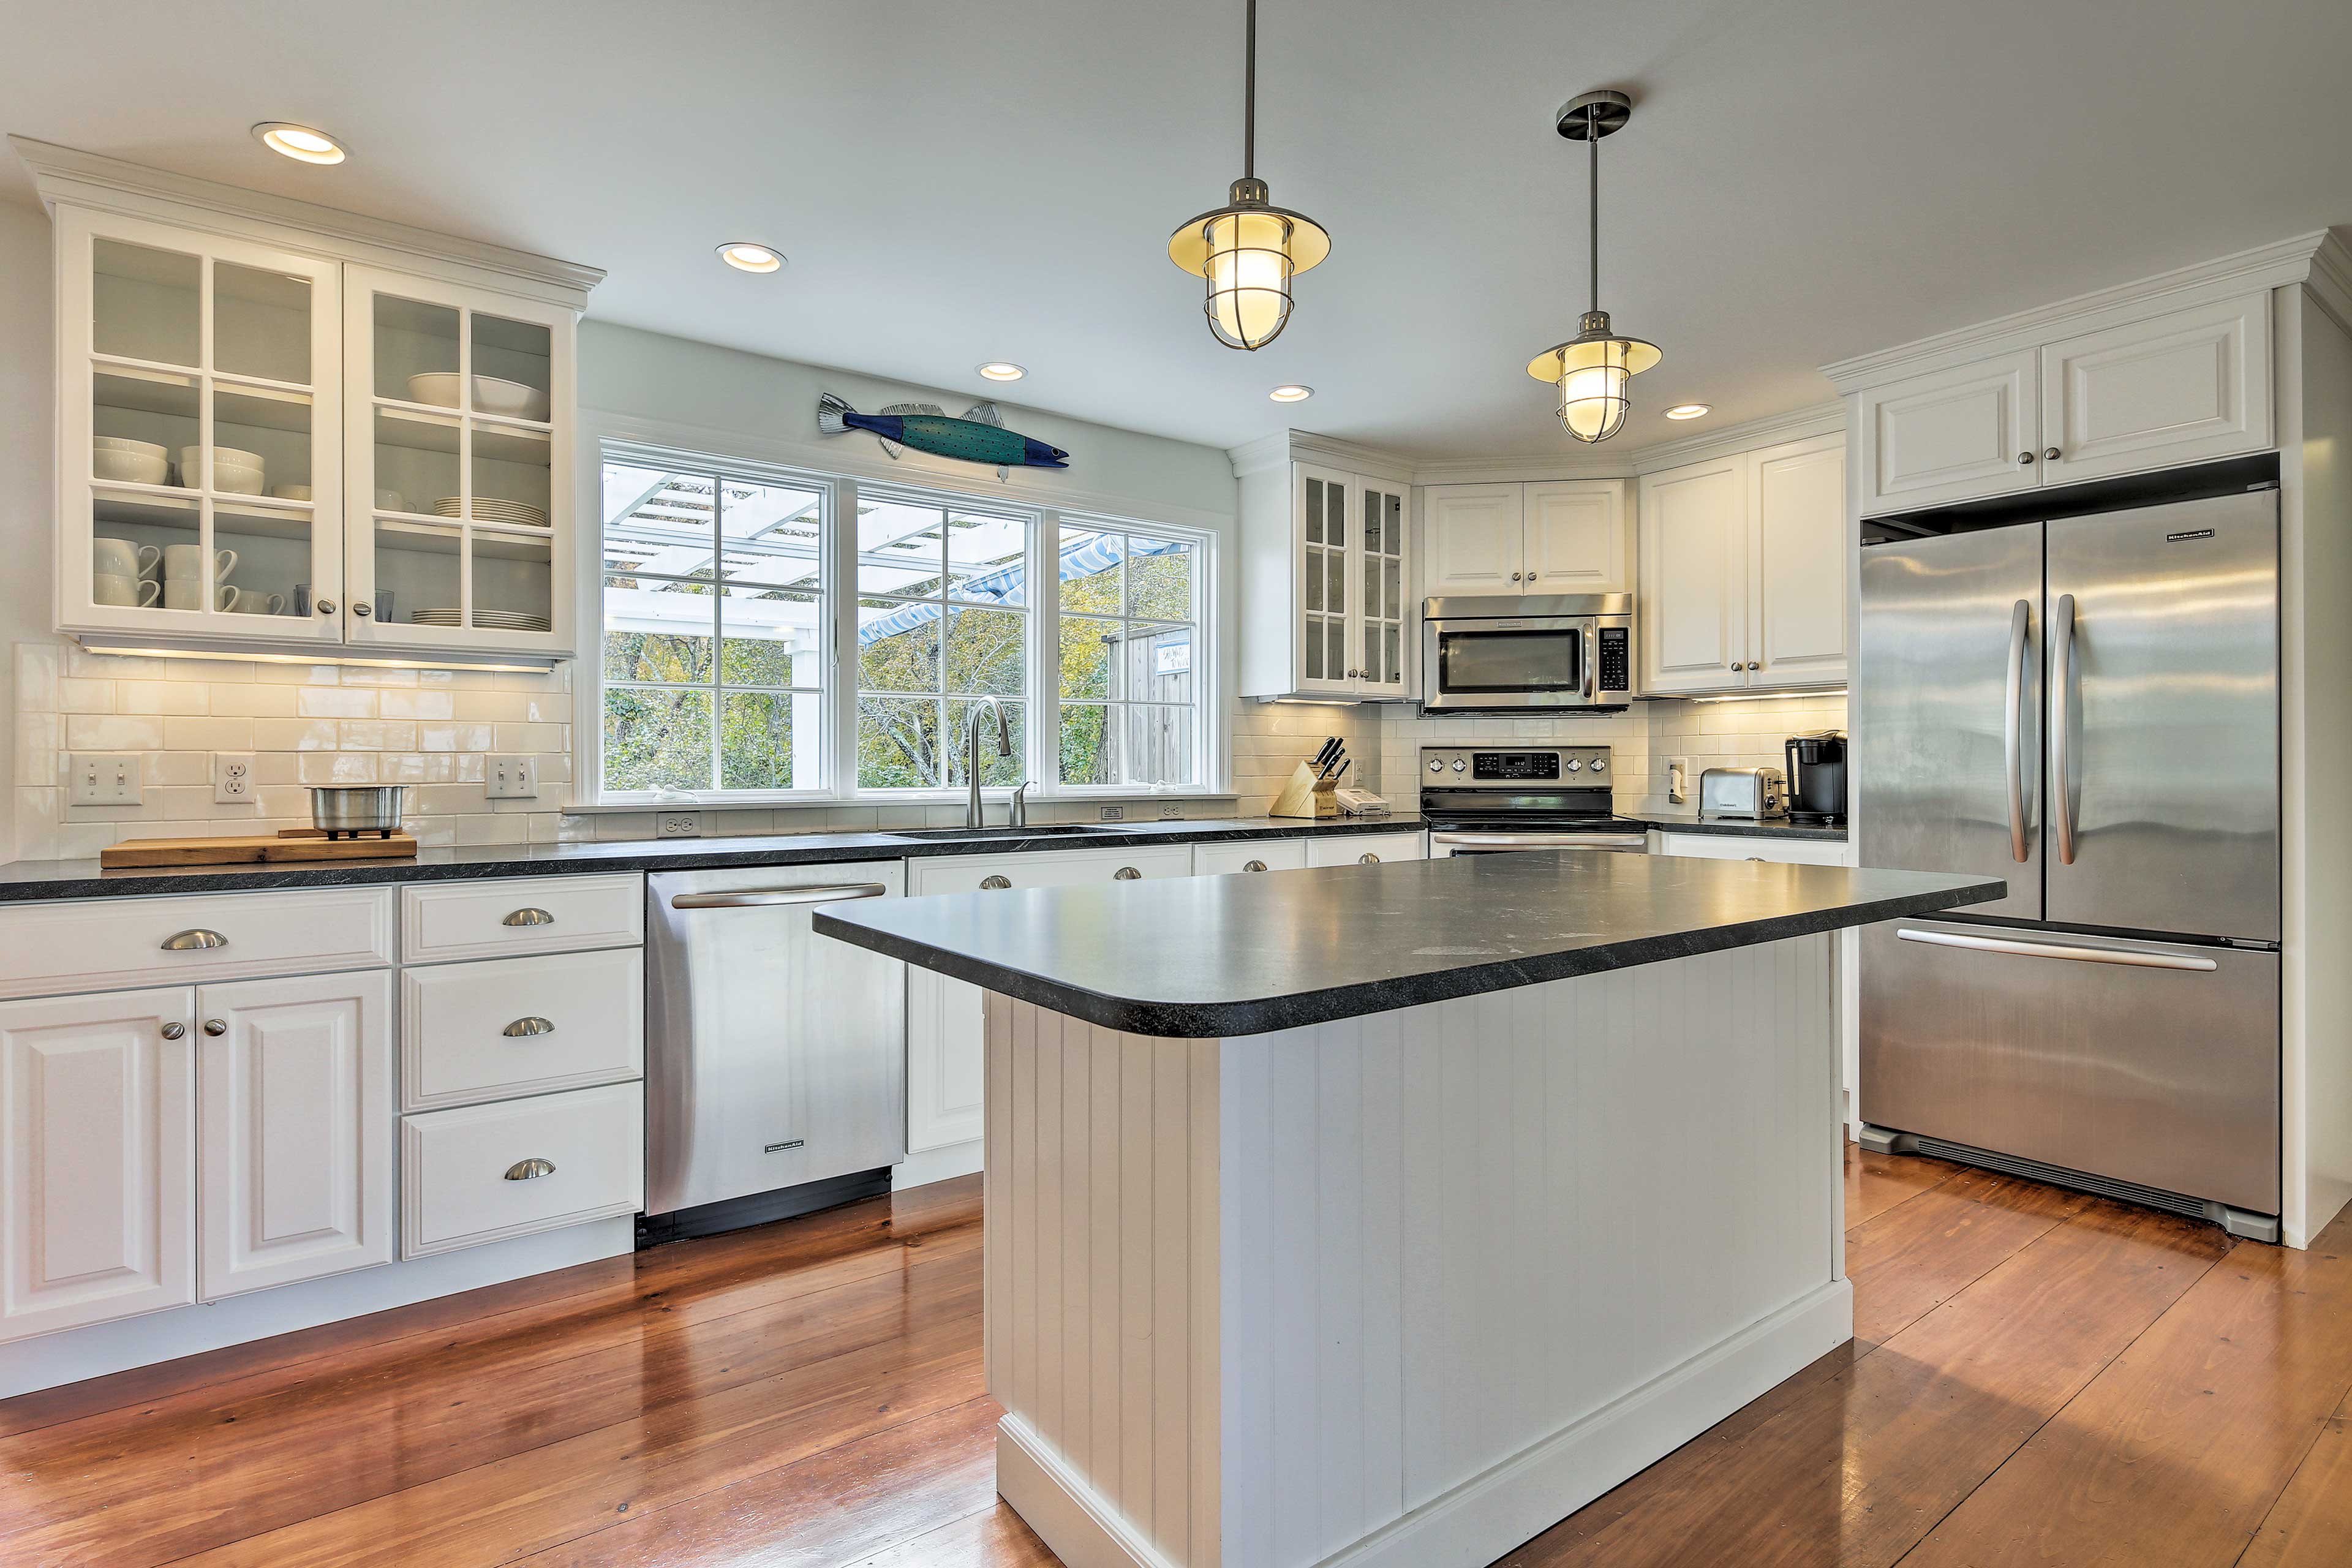 This newly renovated, high-end kitchen will make cooking easy & enjoyable.